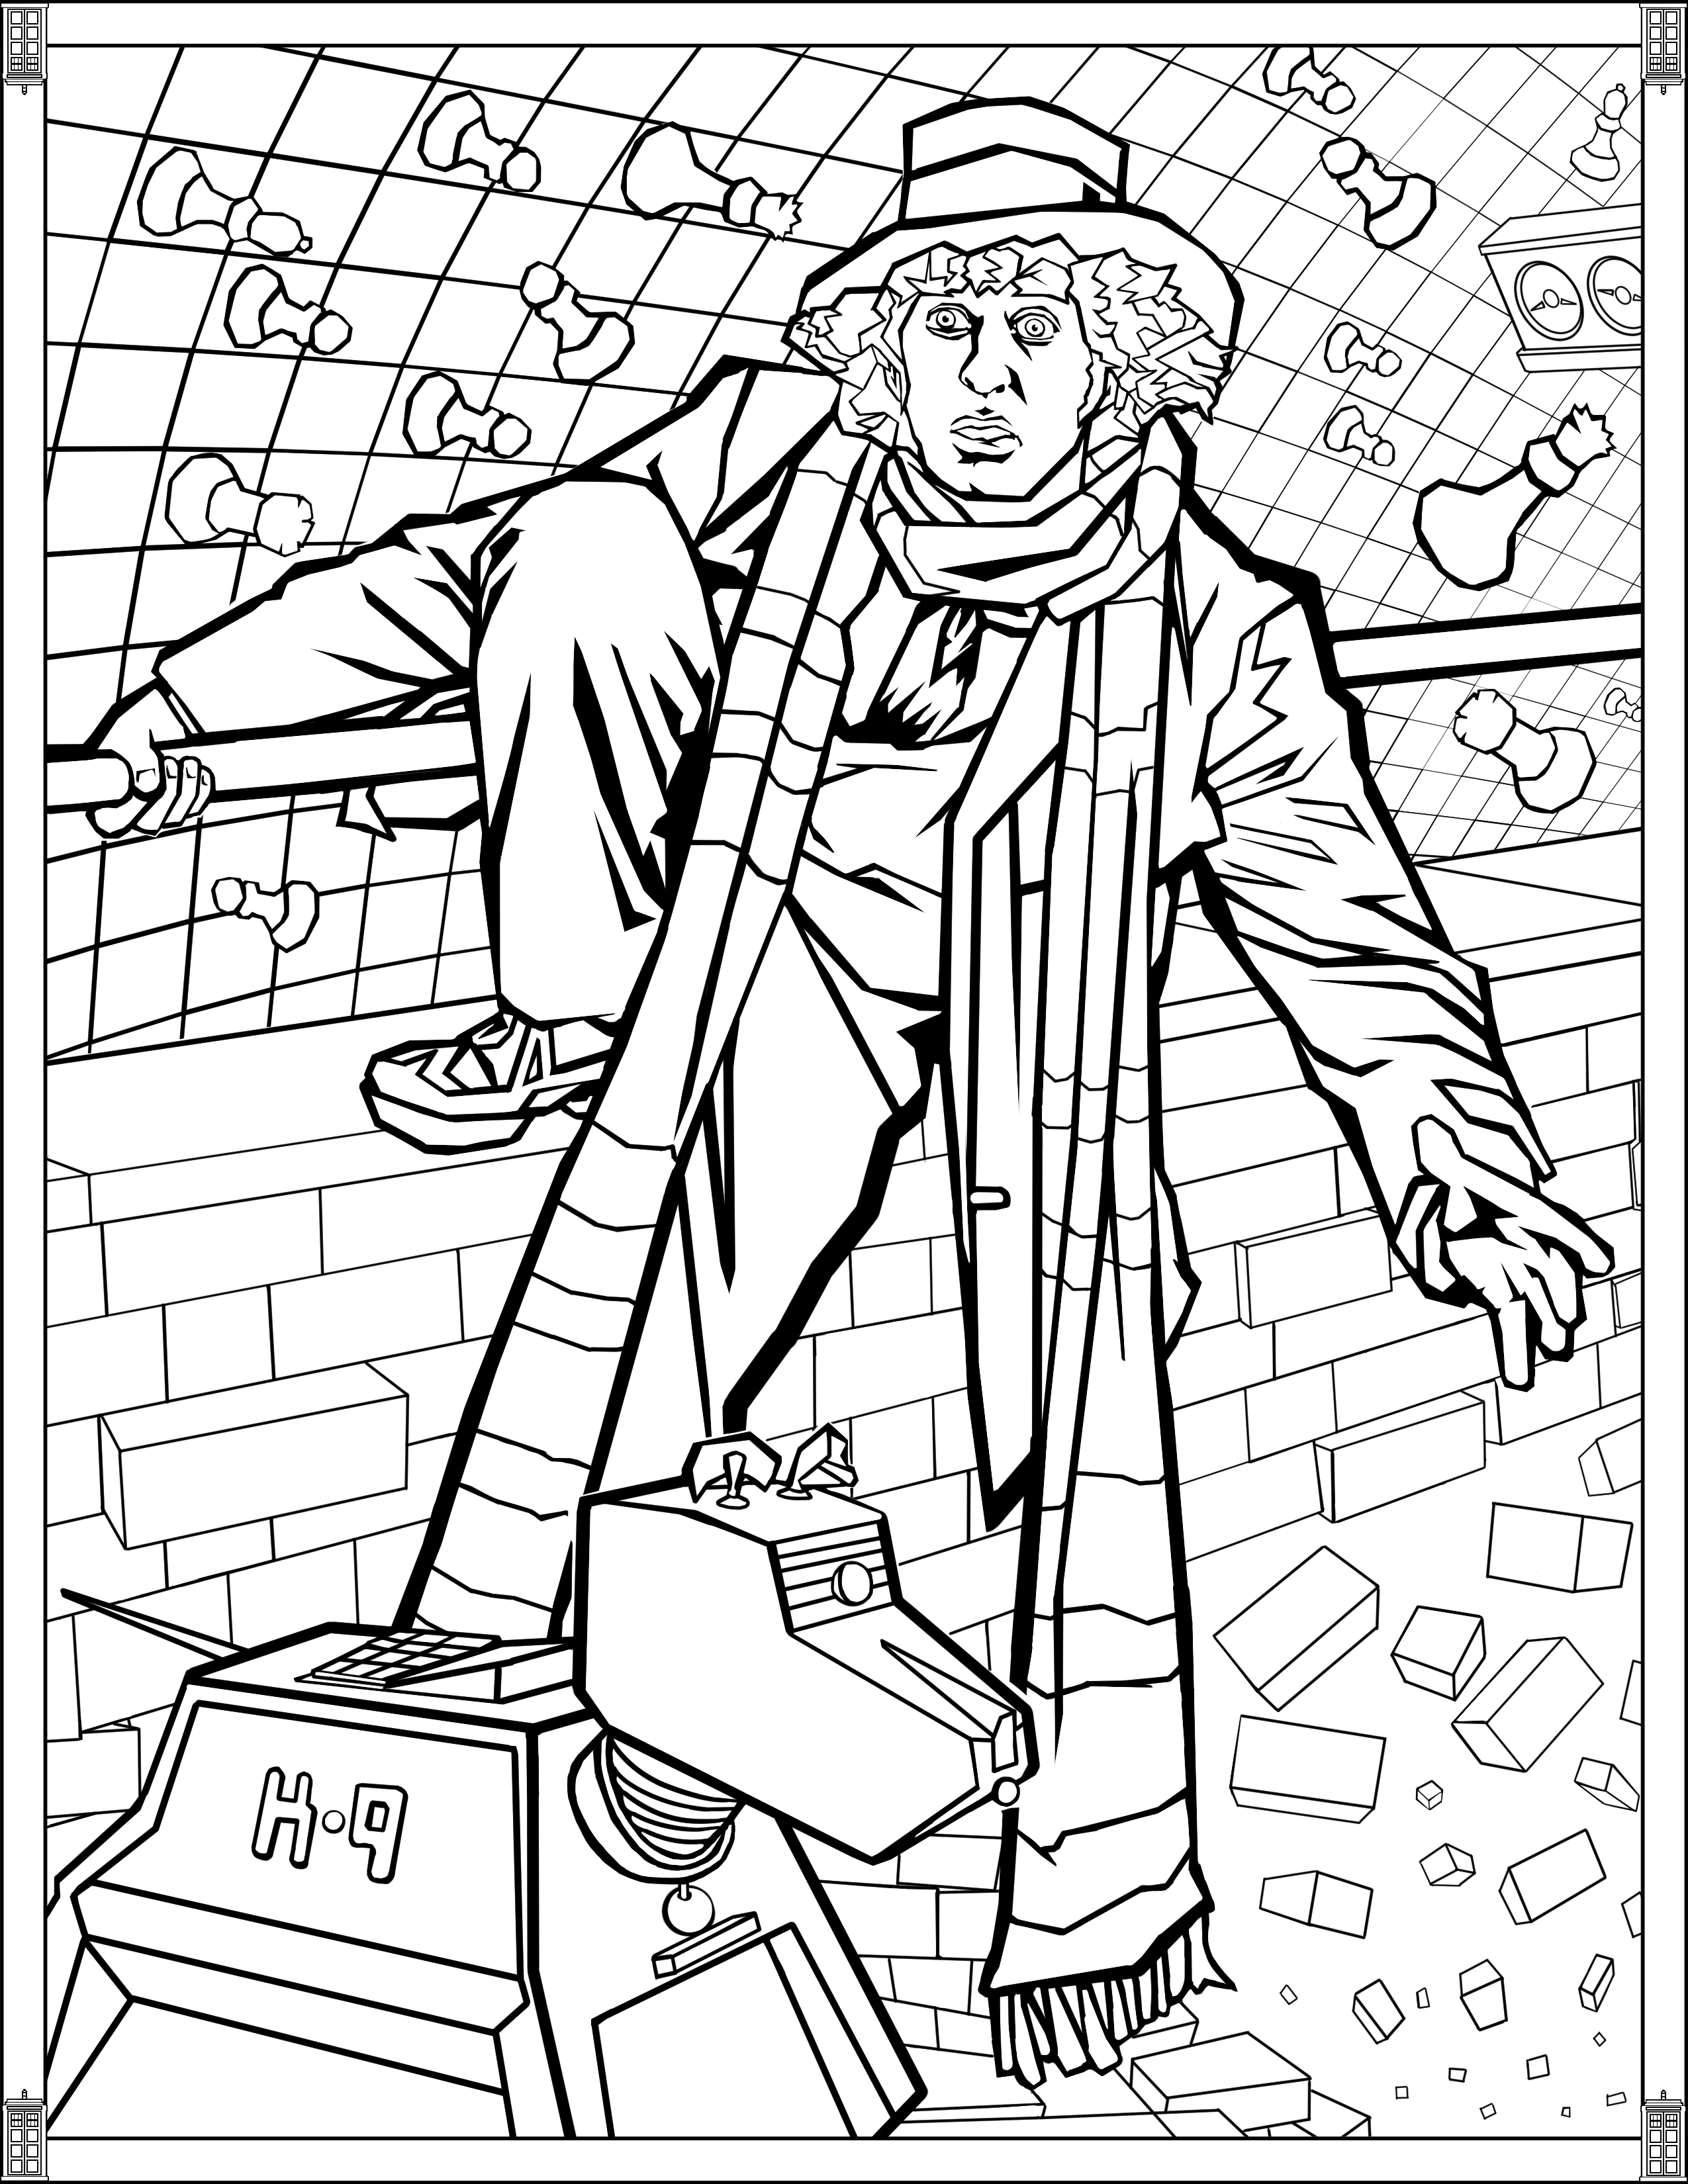 Doctor Who: Wibbly Wobbly Timey Wimey Coloring Pages [Printables] - FUN